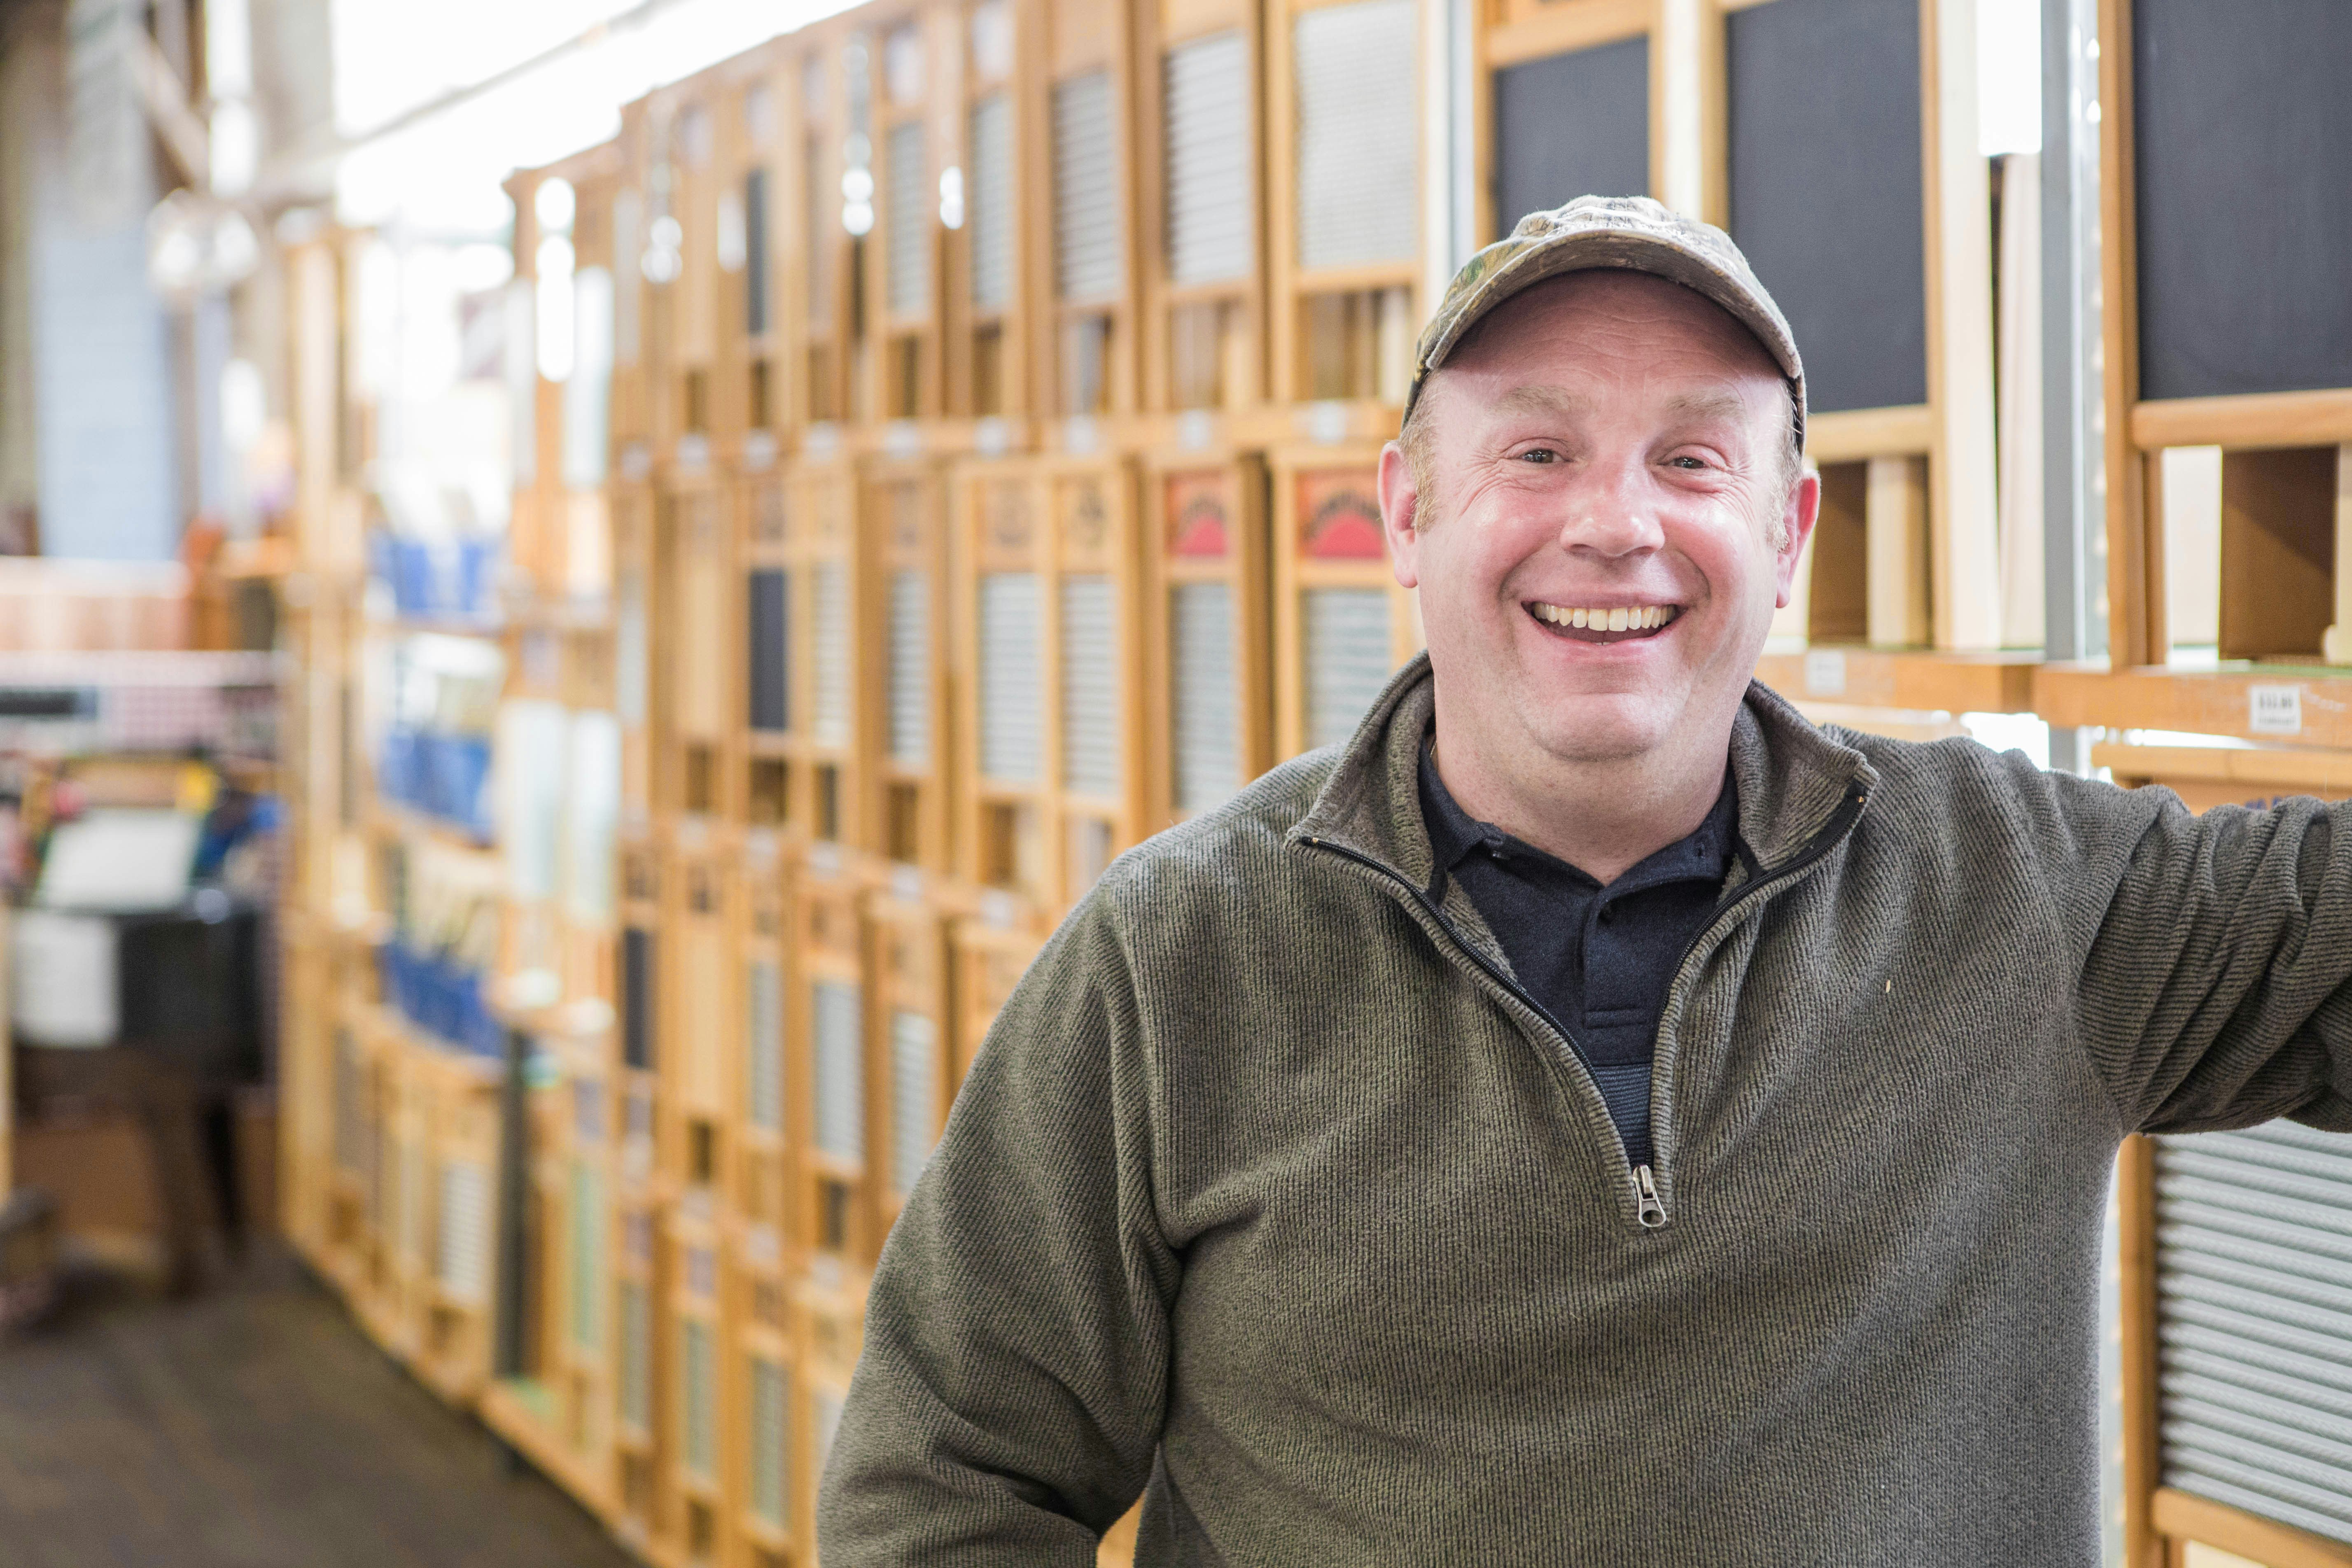 James Martin, co-owner of the Columbus Washboard Company, stands with a big cheerful smile in front of a row of washboards. He wears an olive green quarter-zip pullover with a grey polo shirt underneath and a tan ball cap. 